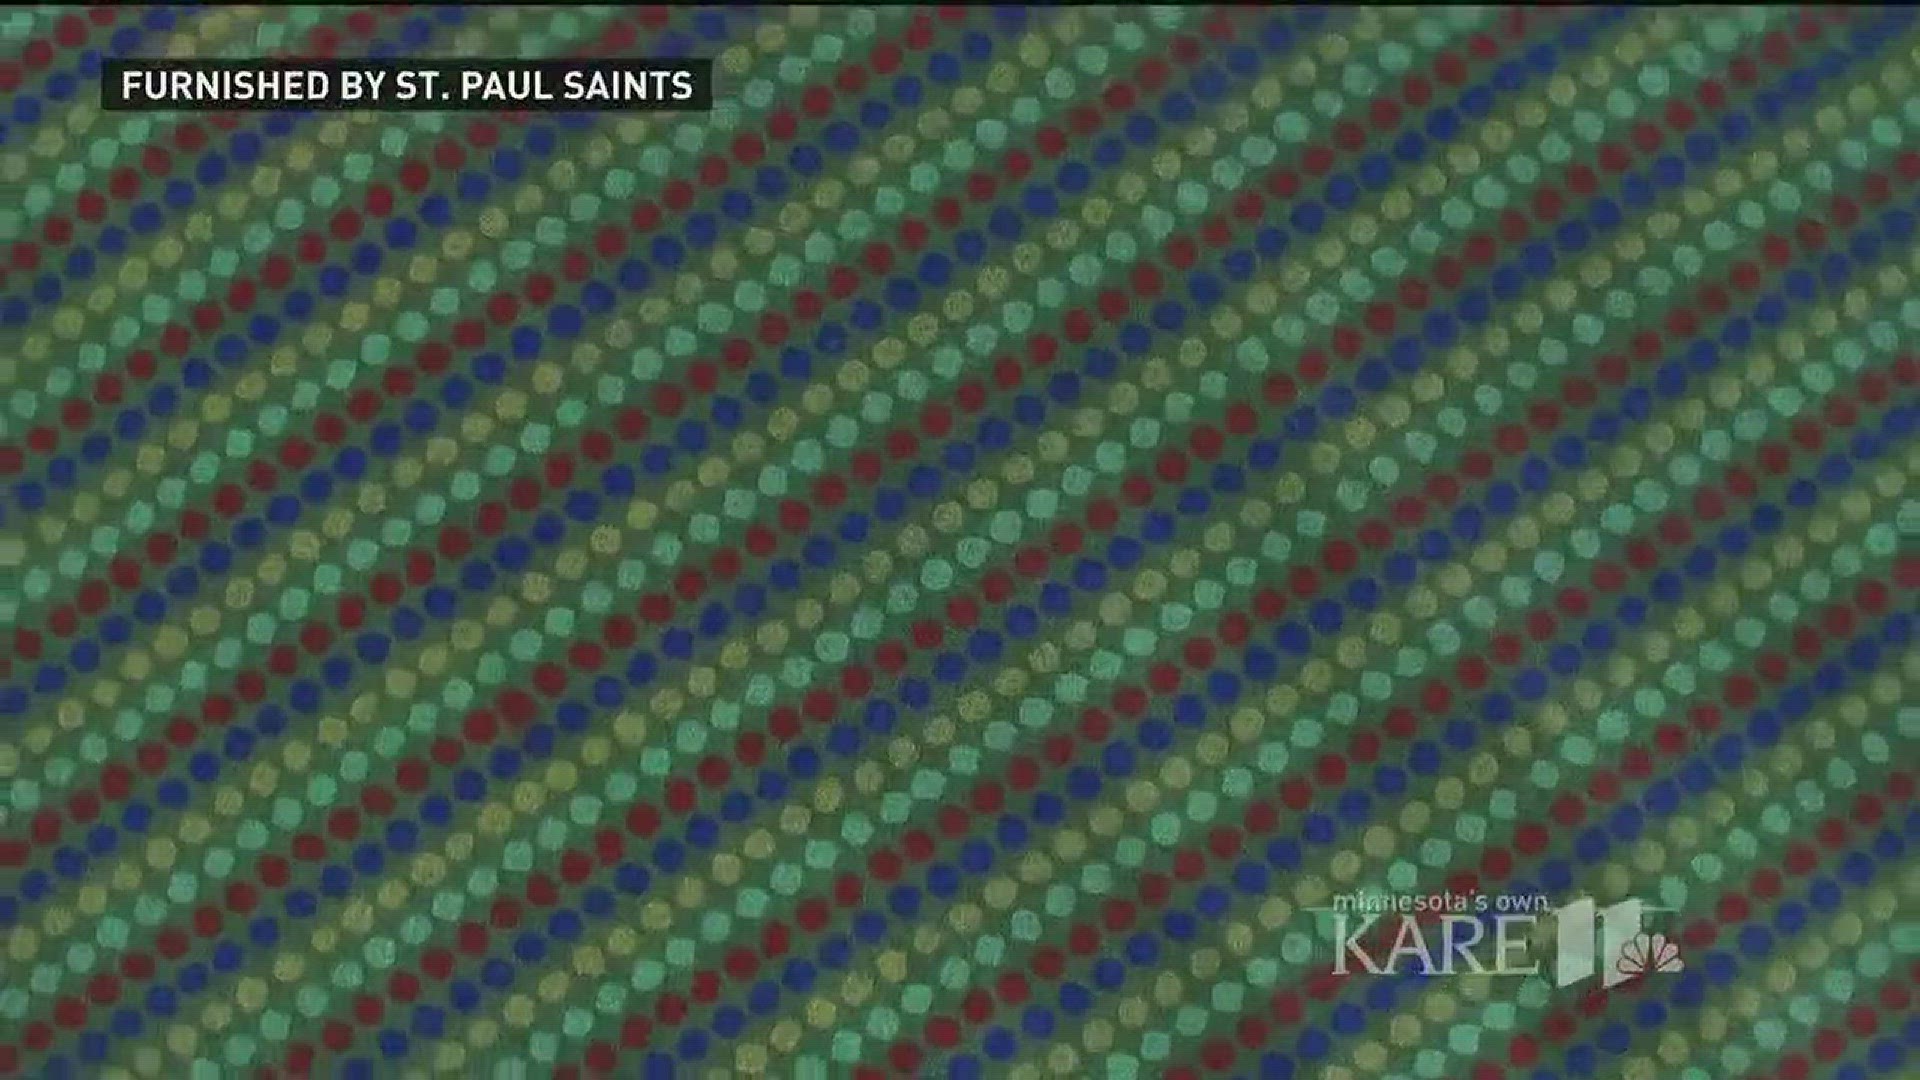 The St. Paul Saints will host a seriously large game of Twister. http://kare11.tv/2vbXOtL